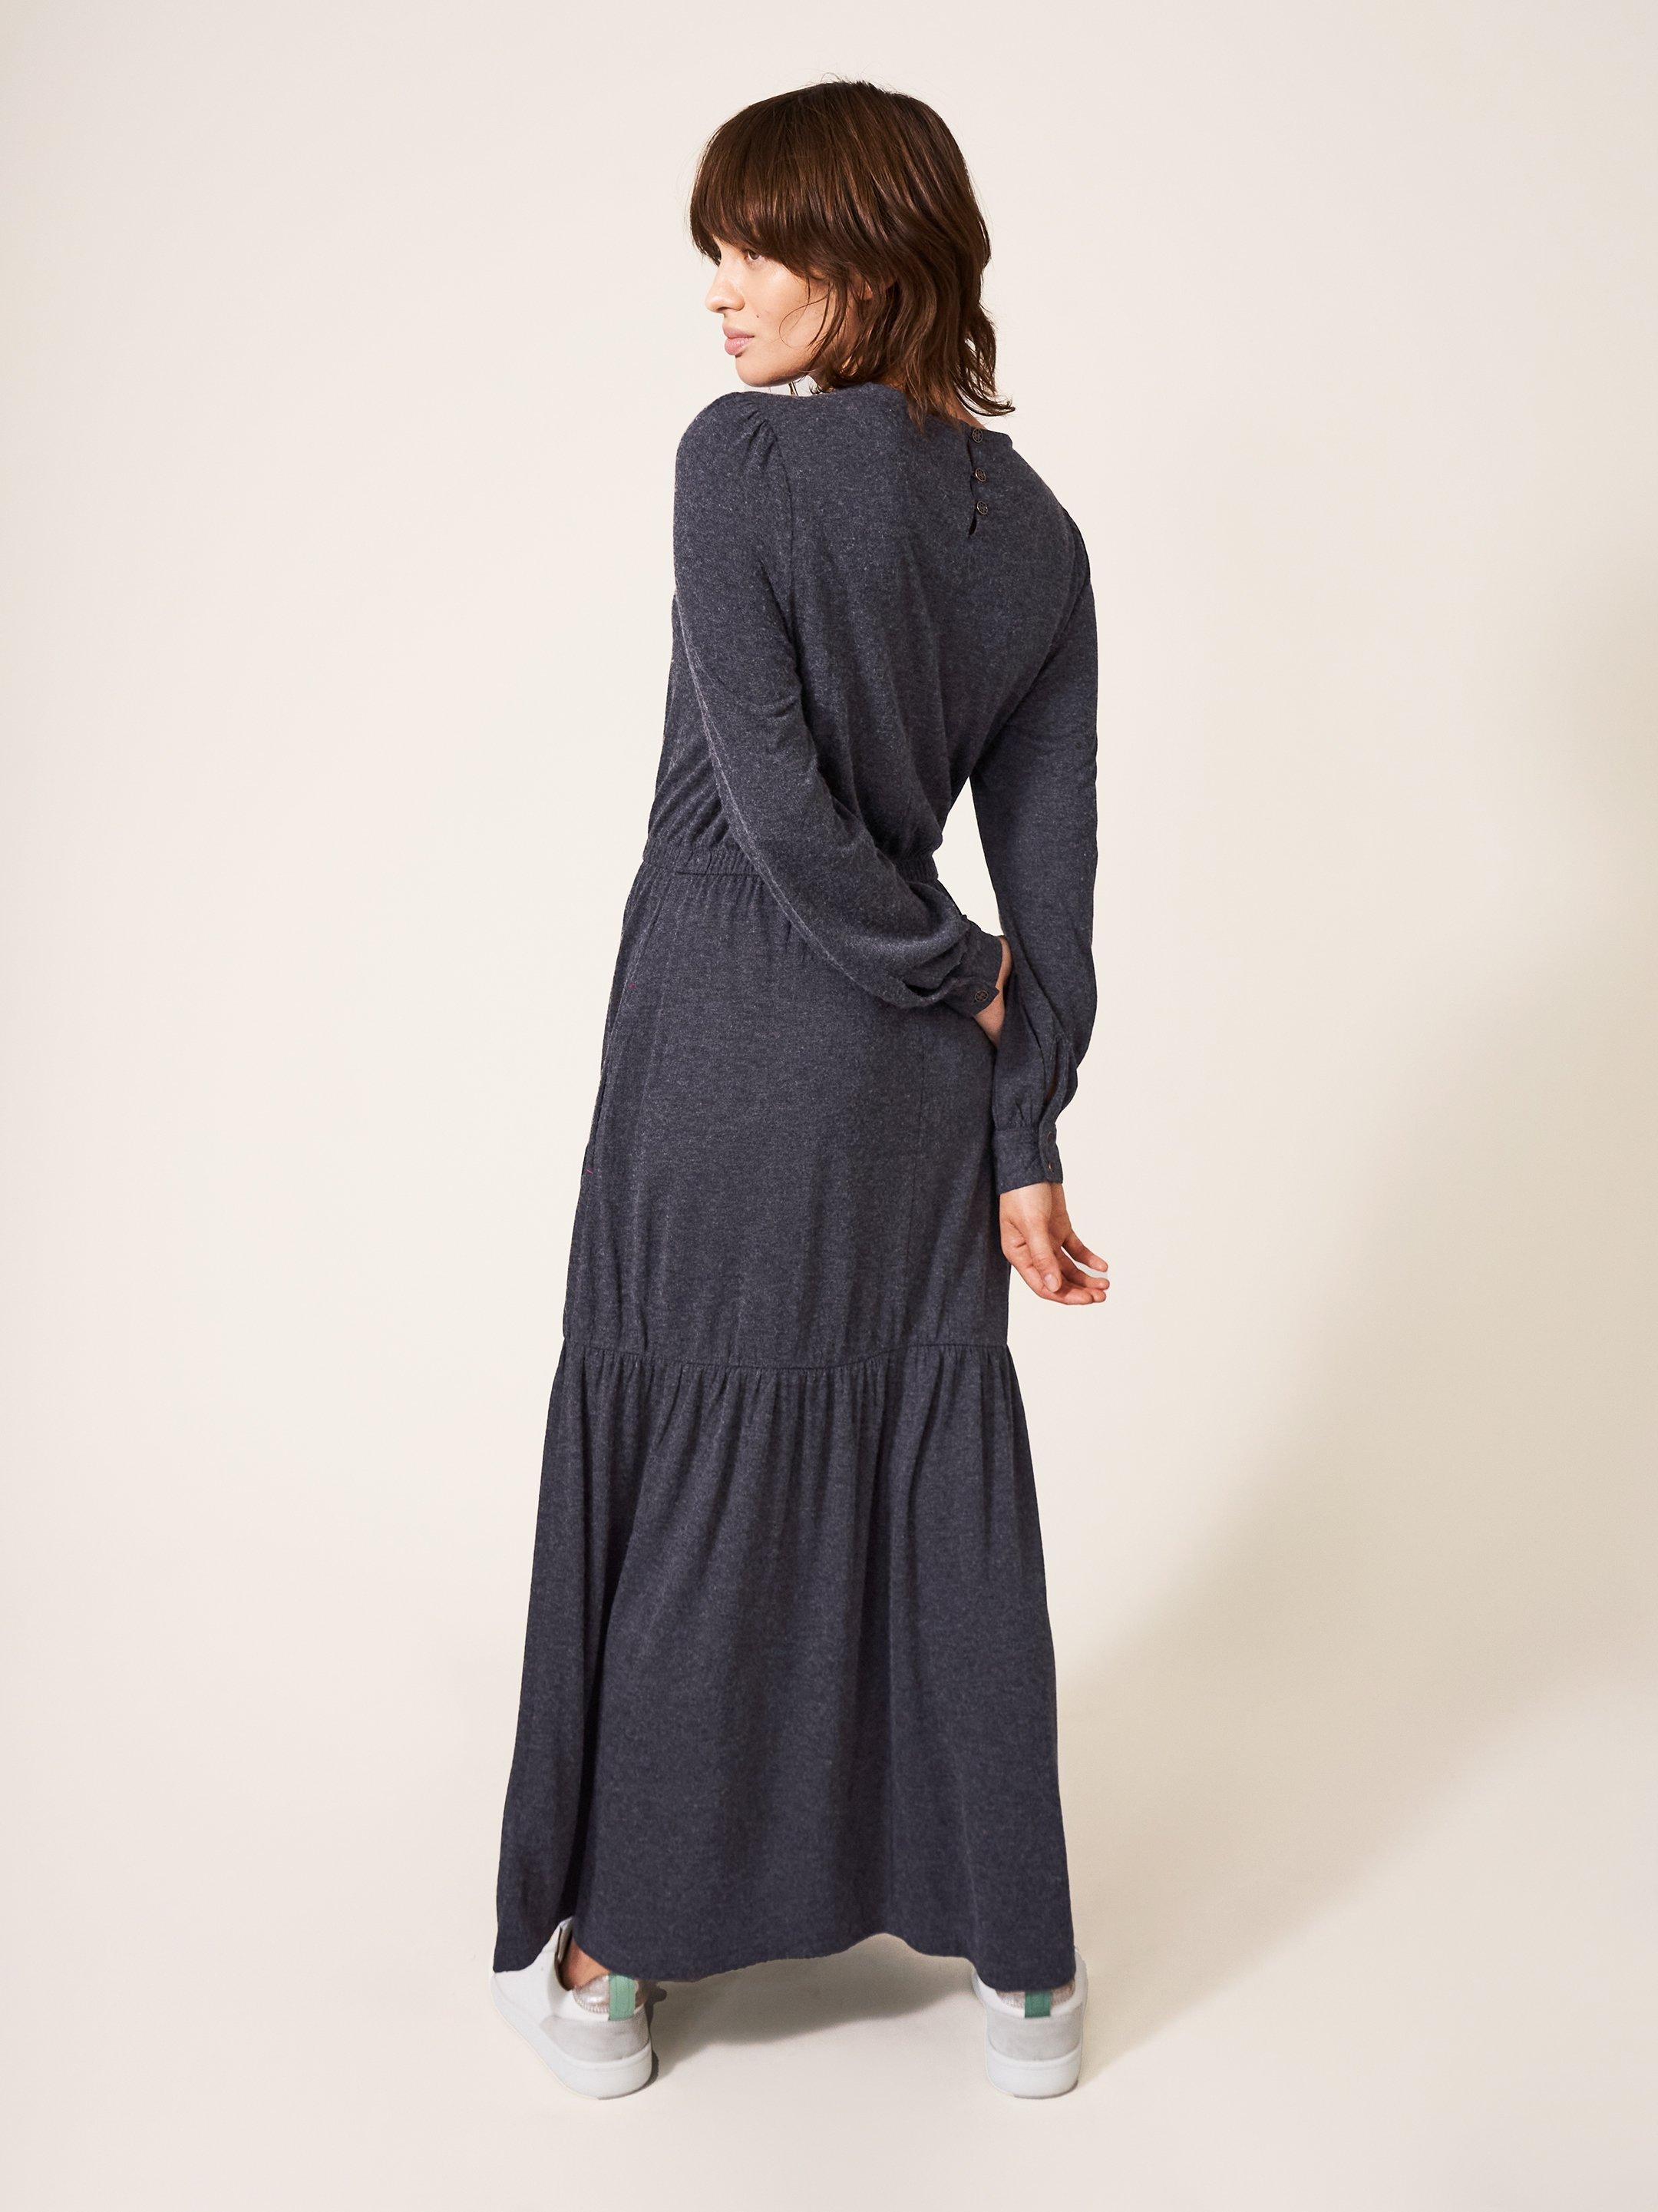 Olive Wool Mix Jersey Dress in CHARC GREY - MODEL BACK